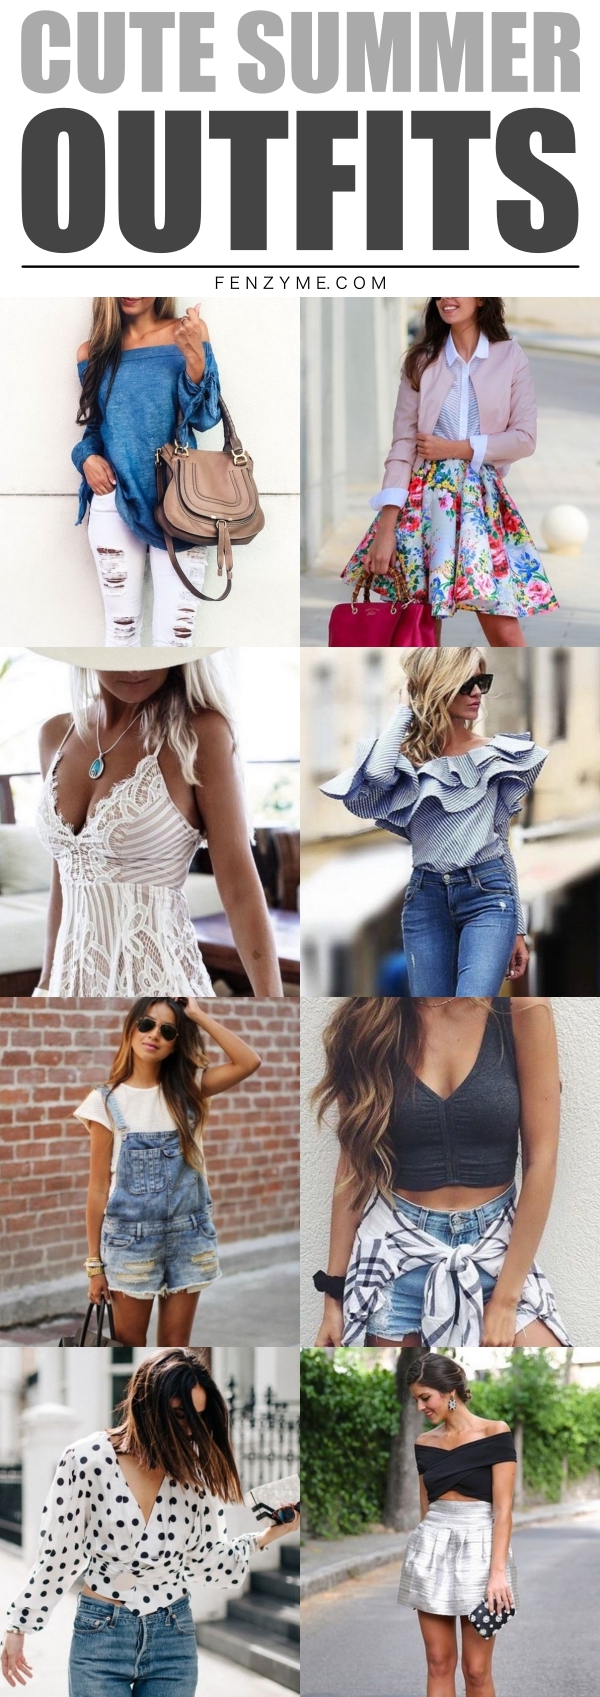 Cute Summer Outfits